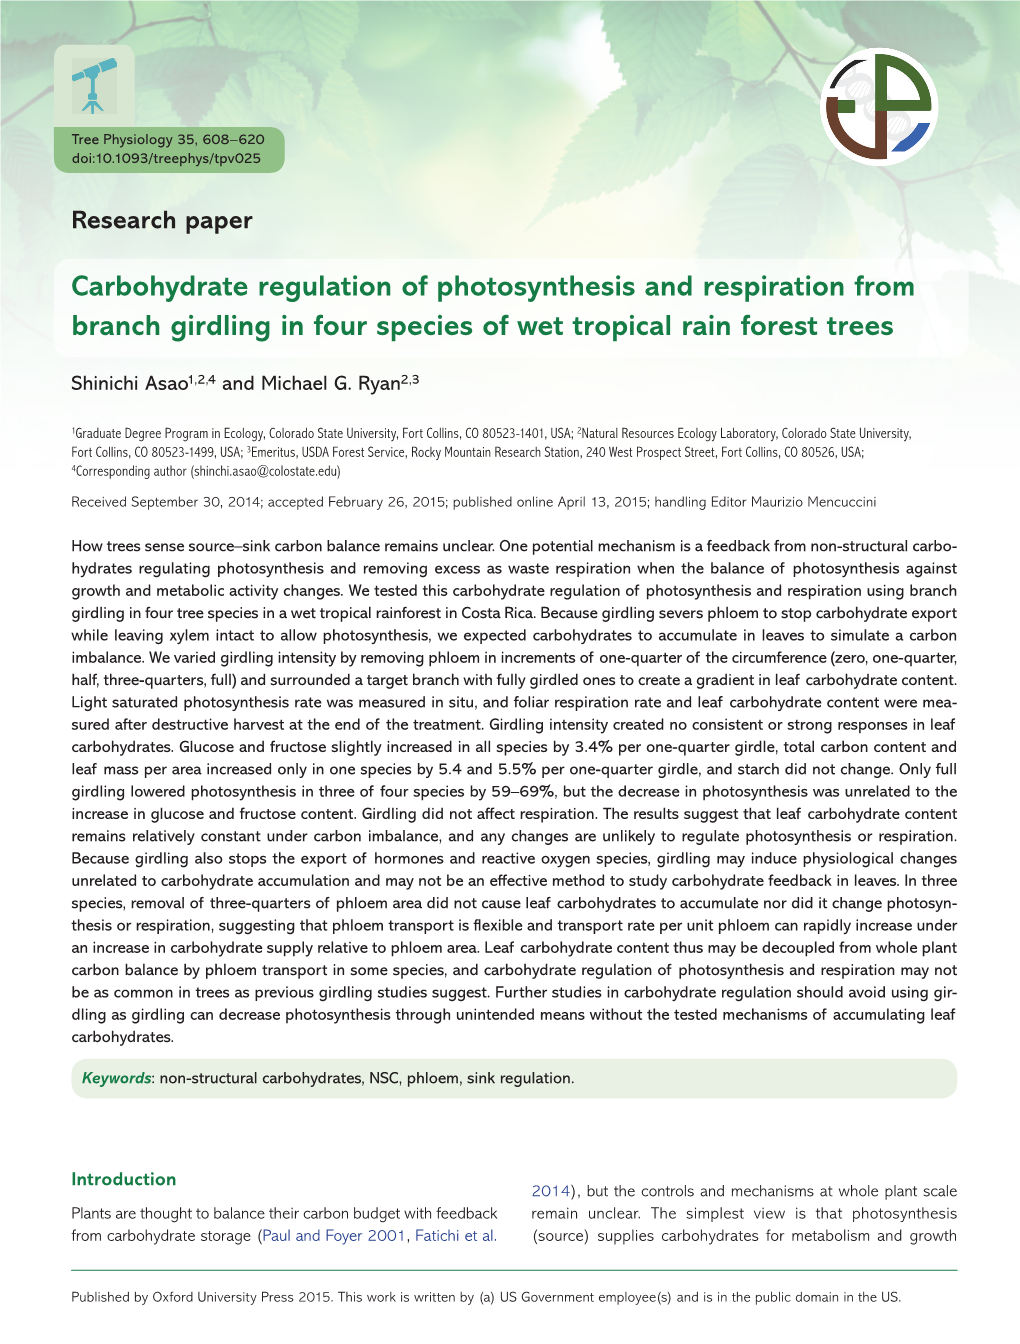 Carbohydrate Regulation of Photosynthesis and Respiration from Branch Girdling in Four Species of Wet Tropical Rain Forest Trees